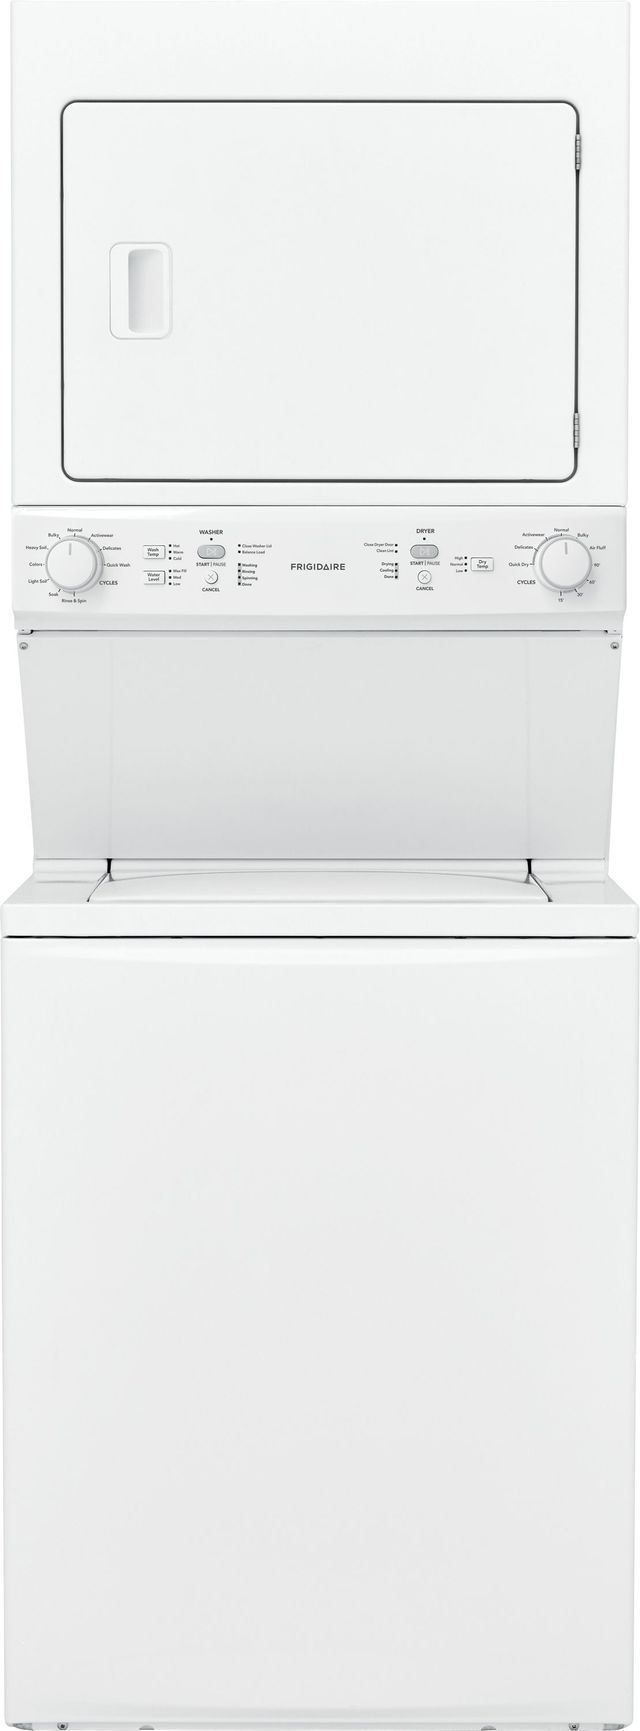 Frigidaire® 3.9 Cu. Ft. Washer, 5.5 cu. Ft. Dryer White Stack Laundry